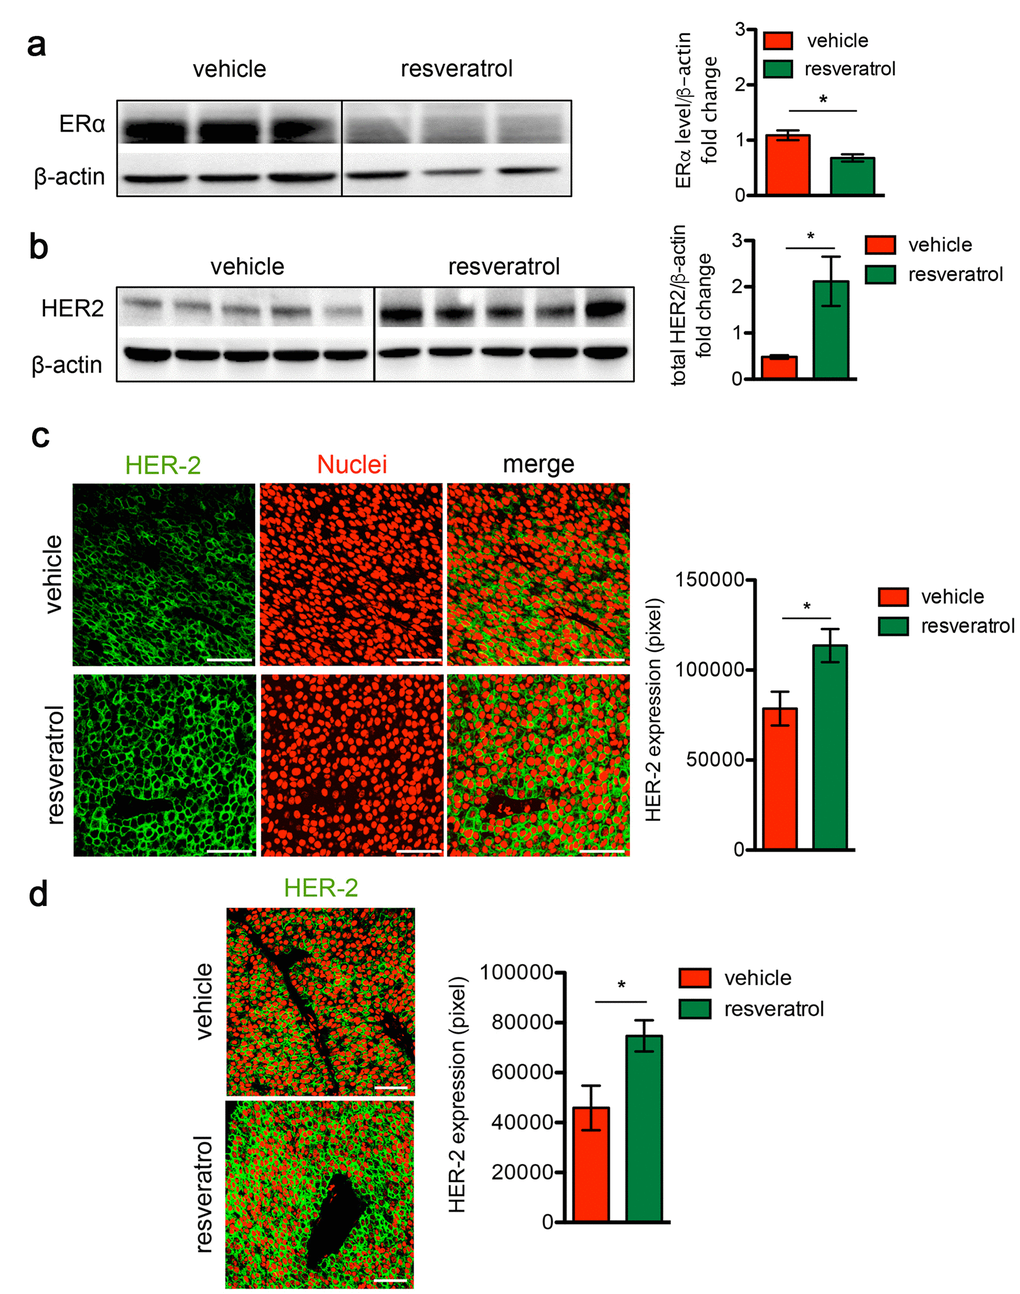 Resveratrol treatment induces HER2 over-expression and ERα down-regulation in HER2+/ERα+ mammary carcinomas. (a) Representative western blot analysis of ERα and β-actin (loading control) in spontaneous mammary tumors from Δ16HER2 mice supplemented or not with resveratrol (left panel), and relative densitometry quantification from three independent experiments (right panel). The significance was determined by unpaired two-tailed student t test, *p b) Representative western blot analysis of HER2 and β-actin (loading control) in spontaneous mammary tumors from Δ16HER2 mice, supplemented or not with resveratrol (left panel), and relative densitometry quantification from three independent experiments (right panel). The significance was determined by unpaired two-tailed student t test, *p c) Left panel: representative immunofluorescence images of tumor sections from control and resveratrol supplemented mice stained with an antibody anti-HER2 (green) and DRAQ5 dye (red) for nuclei staining. Magnification 400 X. Right panel: quantification of HER2 staining in tumors from resveratrol and vehicle treated mice. Data are expressed as mean ± SEM. *p d) Resveratrol treatment induces HER2 over-expression in lung metastases. Left panel: representative immunofluorescence images of lung metastasis sections from control and resveratrol supplemented mice stained with an antibody anti-HER2 (green) and DRAQ5 (red). Magnification 400 X. Right panel: quantification of HER2 staining in tumors from resveratrol and vehicle treated mice. Data are expressed as mean ± SEM. *p 